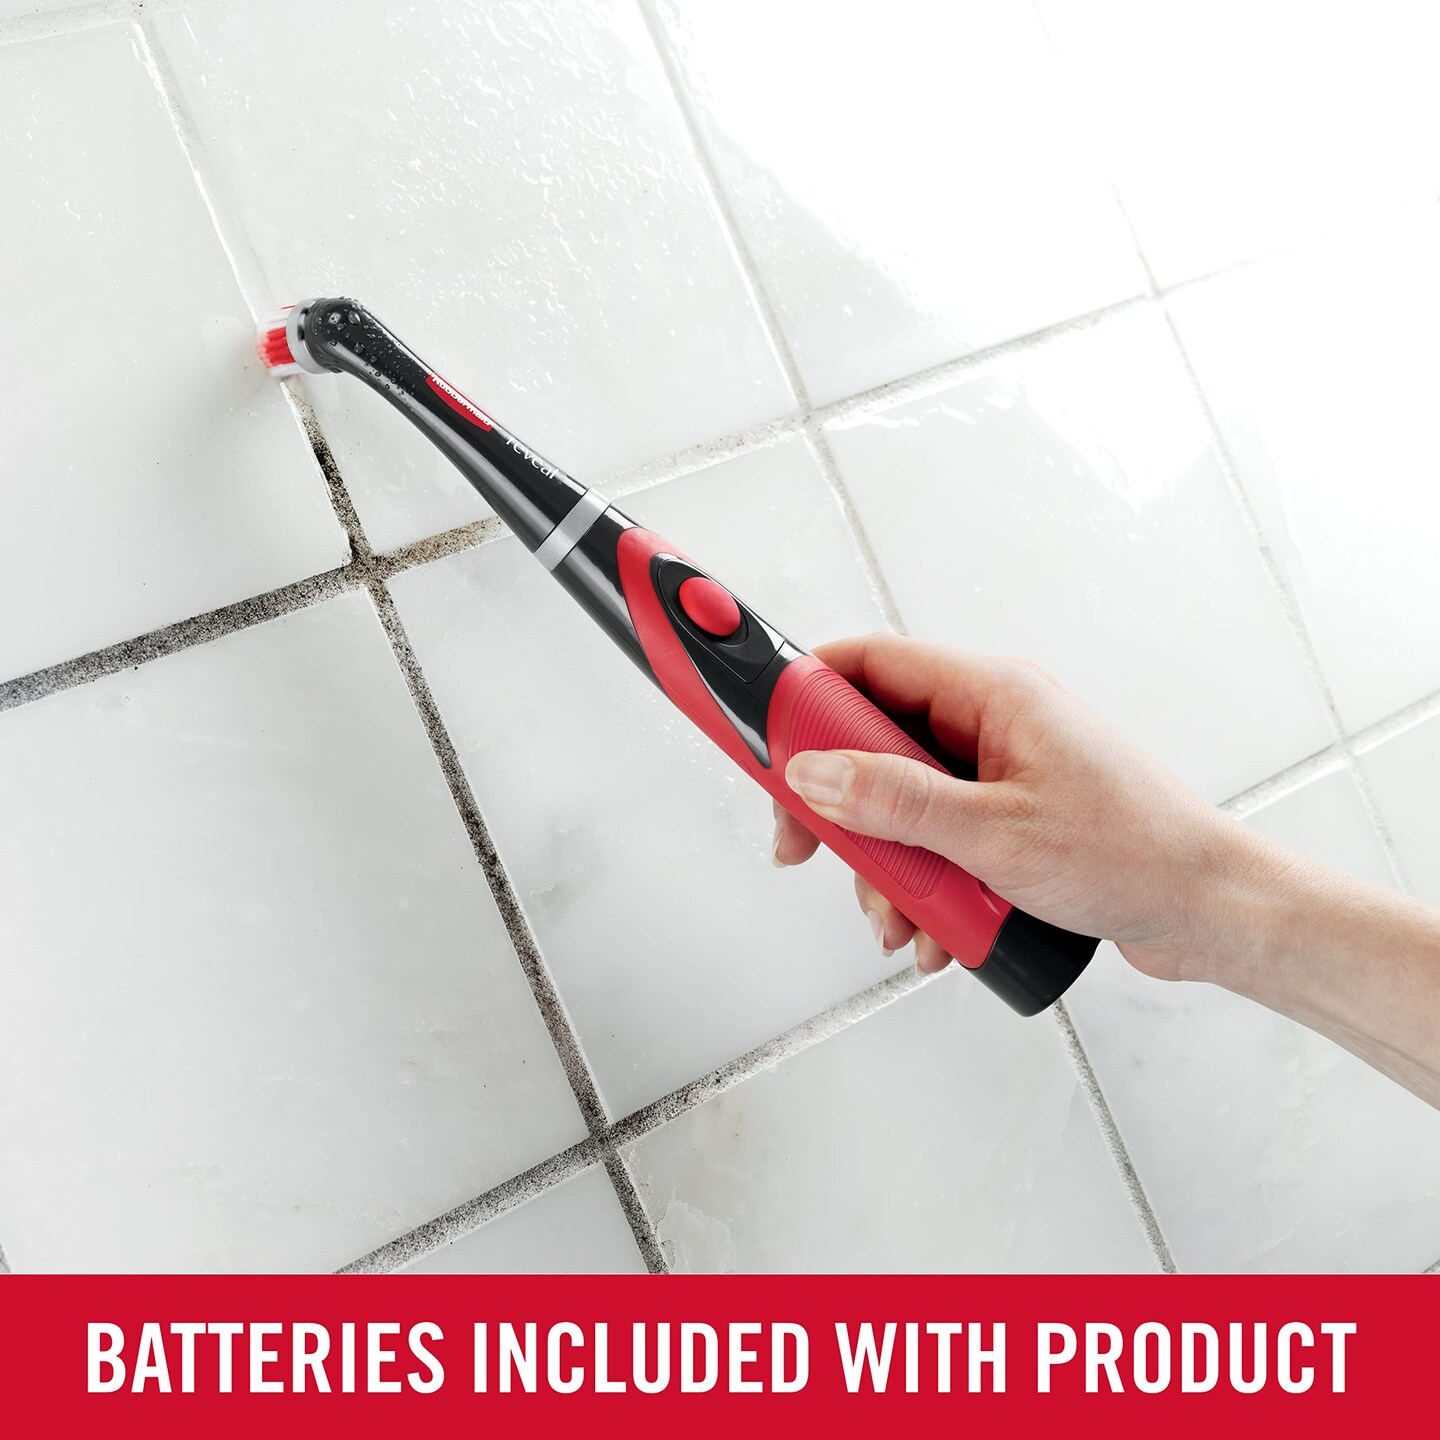 Rubbermaid Reveal Cordless Battery Power Scrubber, Red, Multi